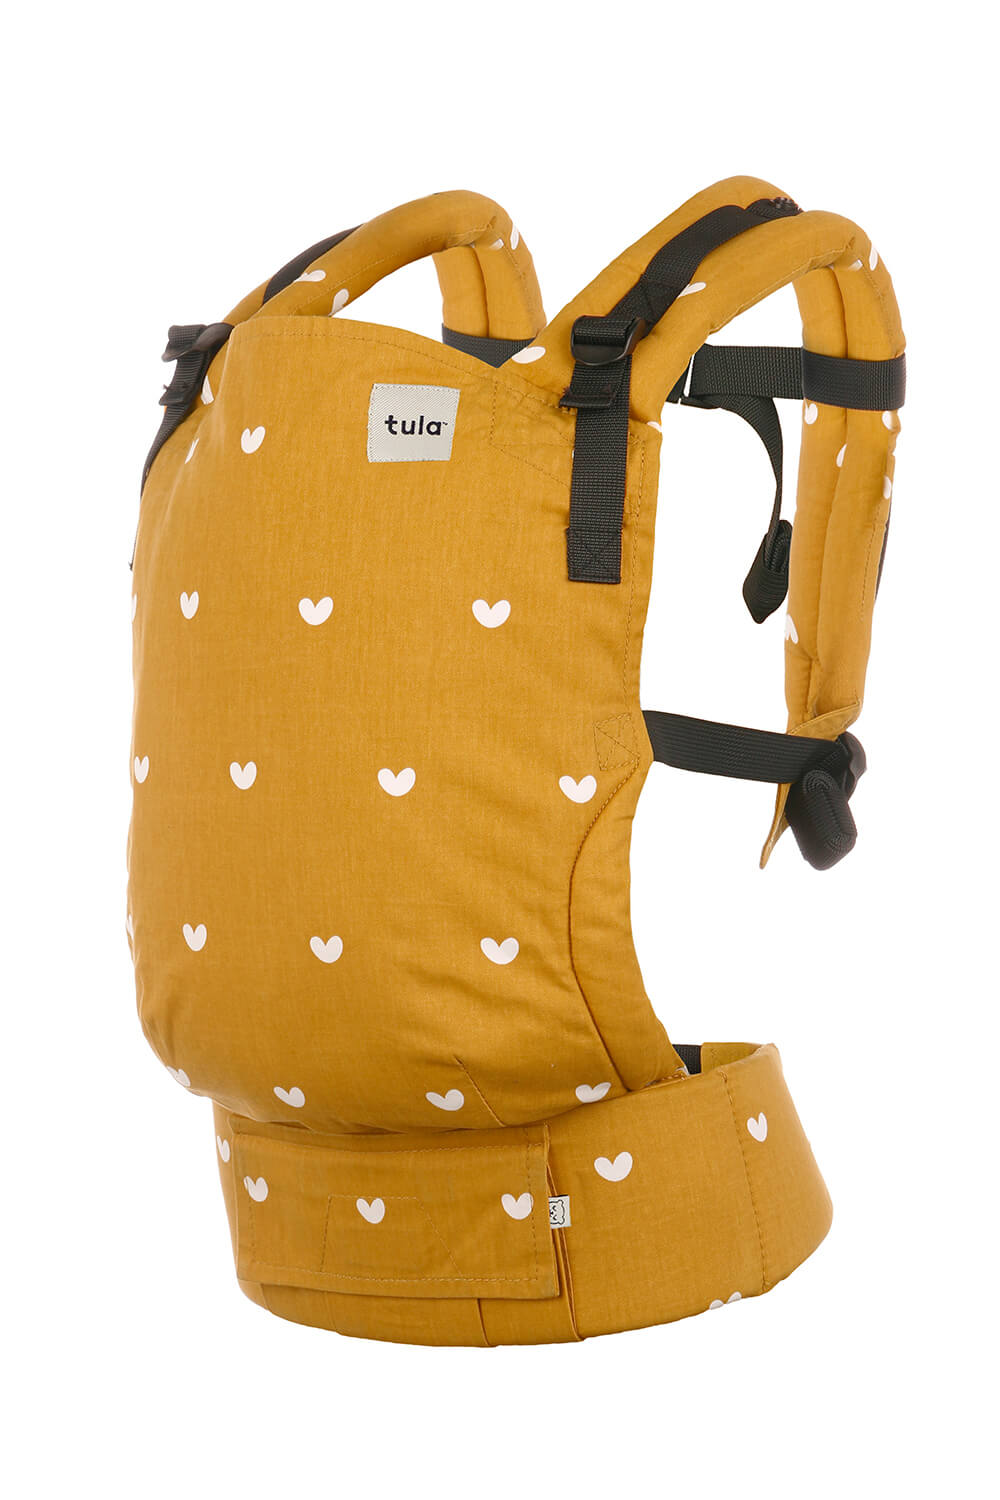 Play - Cotton Free-to-Grow Baby Carrier